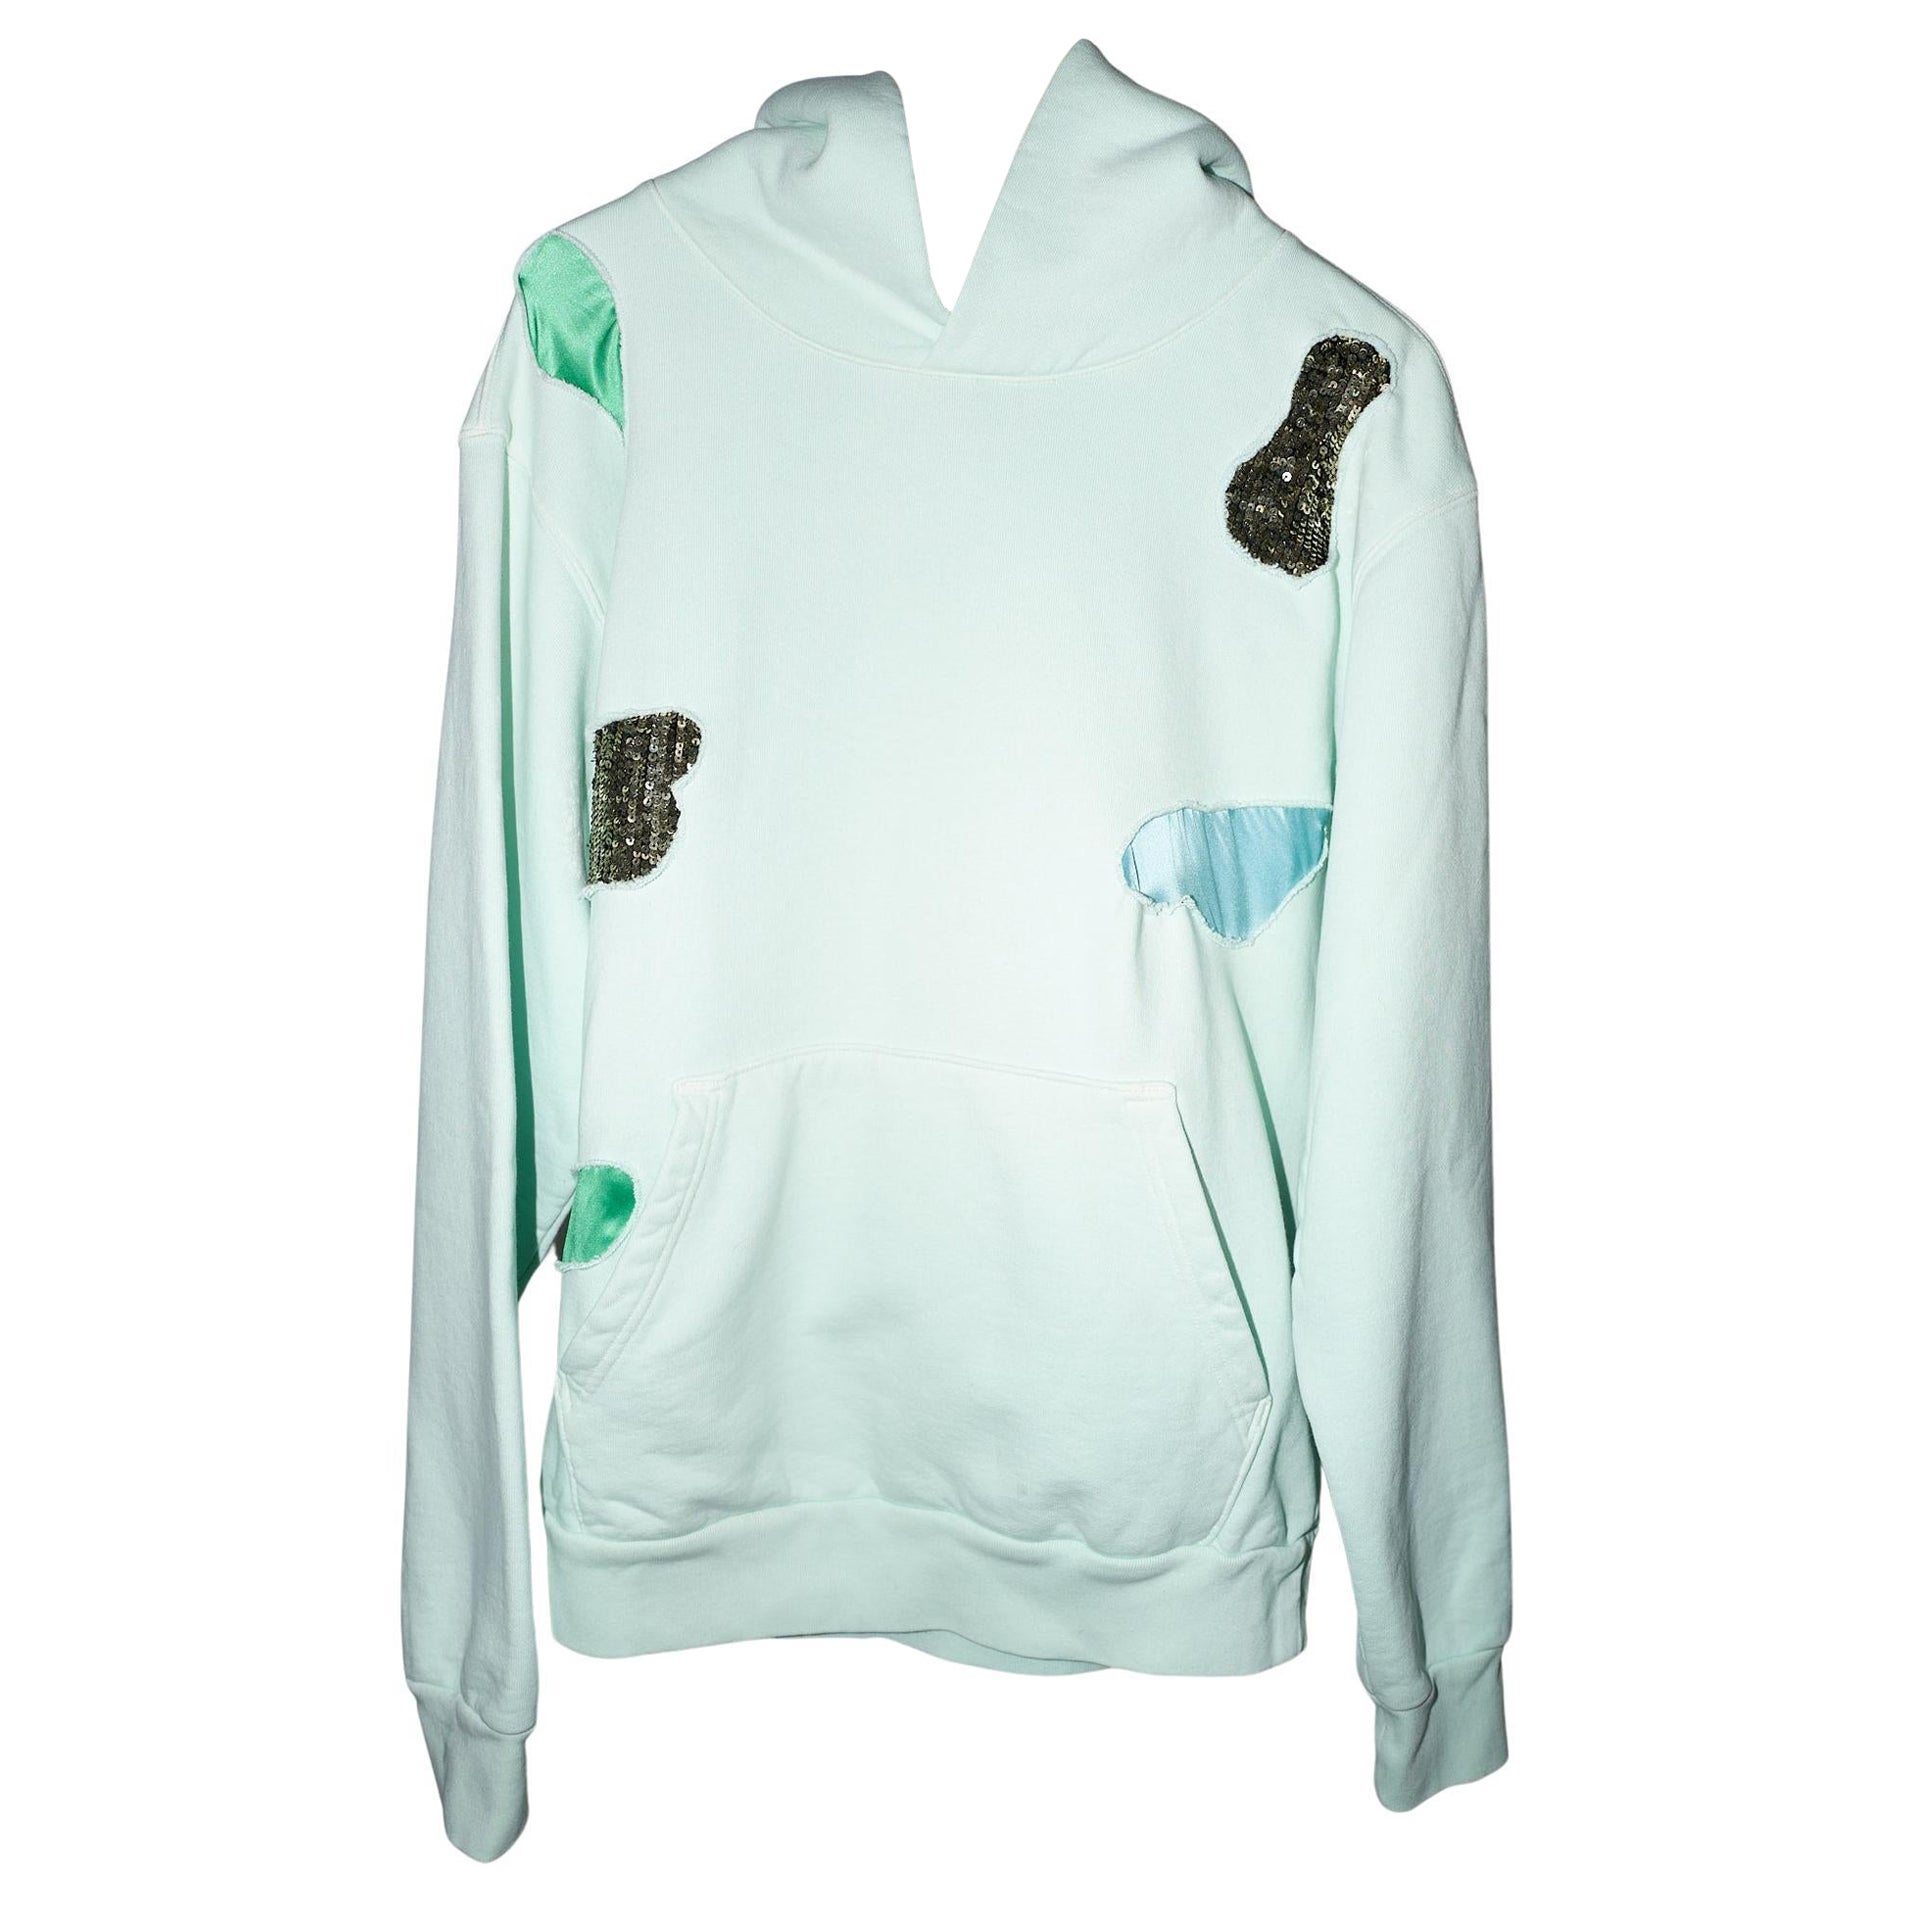 Brand: Designer J Dauphin
Sweatshirt Hoodie Organic Cotton Mint Green Patch Work J Dauphin


Available in Size Small or Medium


J Dauphin express a hybrid of easy-luxe and bourgeoisie jet-set look. Effortless and versatile, elegant and classy they